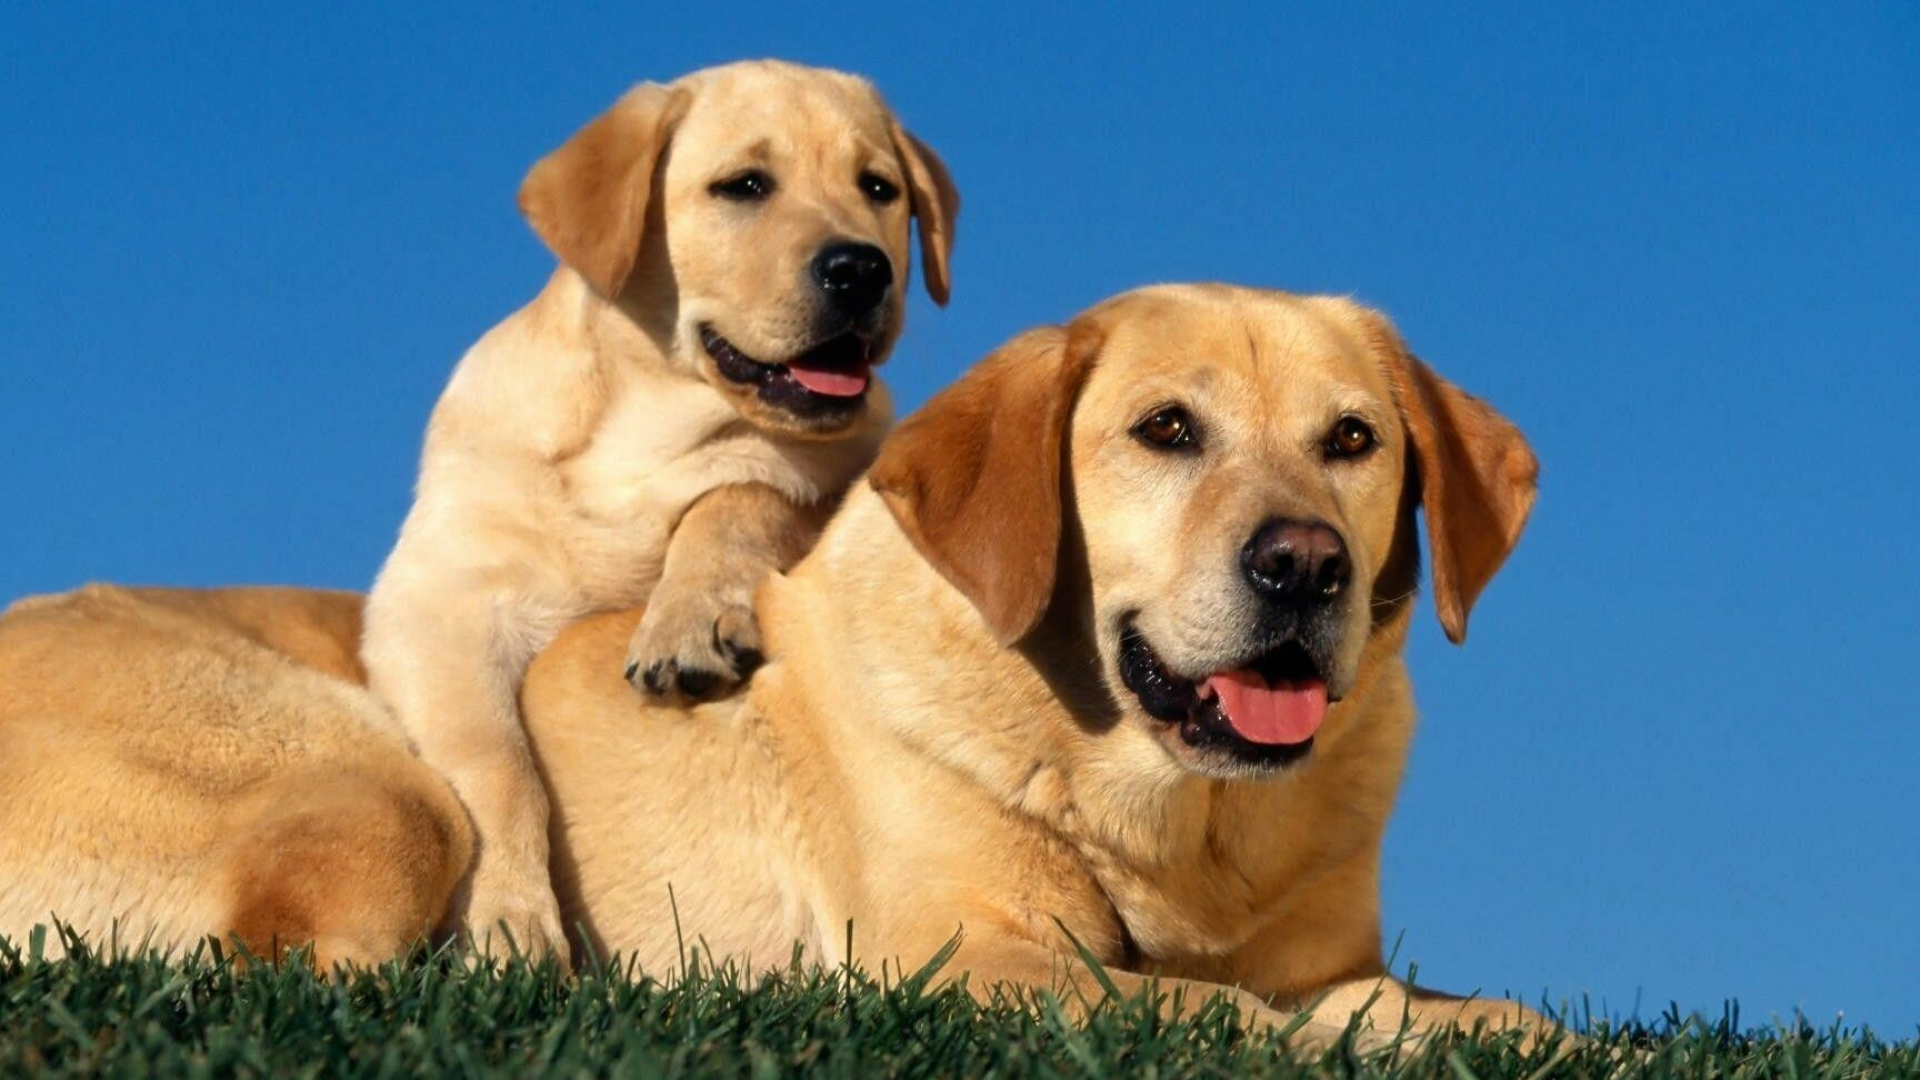 Labrador Retriever: Developed in the United Kingdom from fishing dogs. 1920x1080 Full HD Wallpaper.